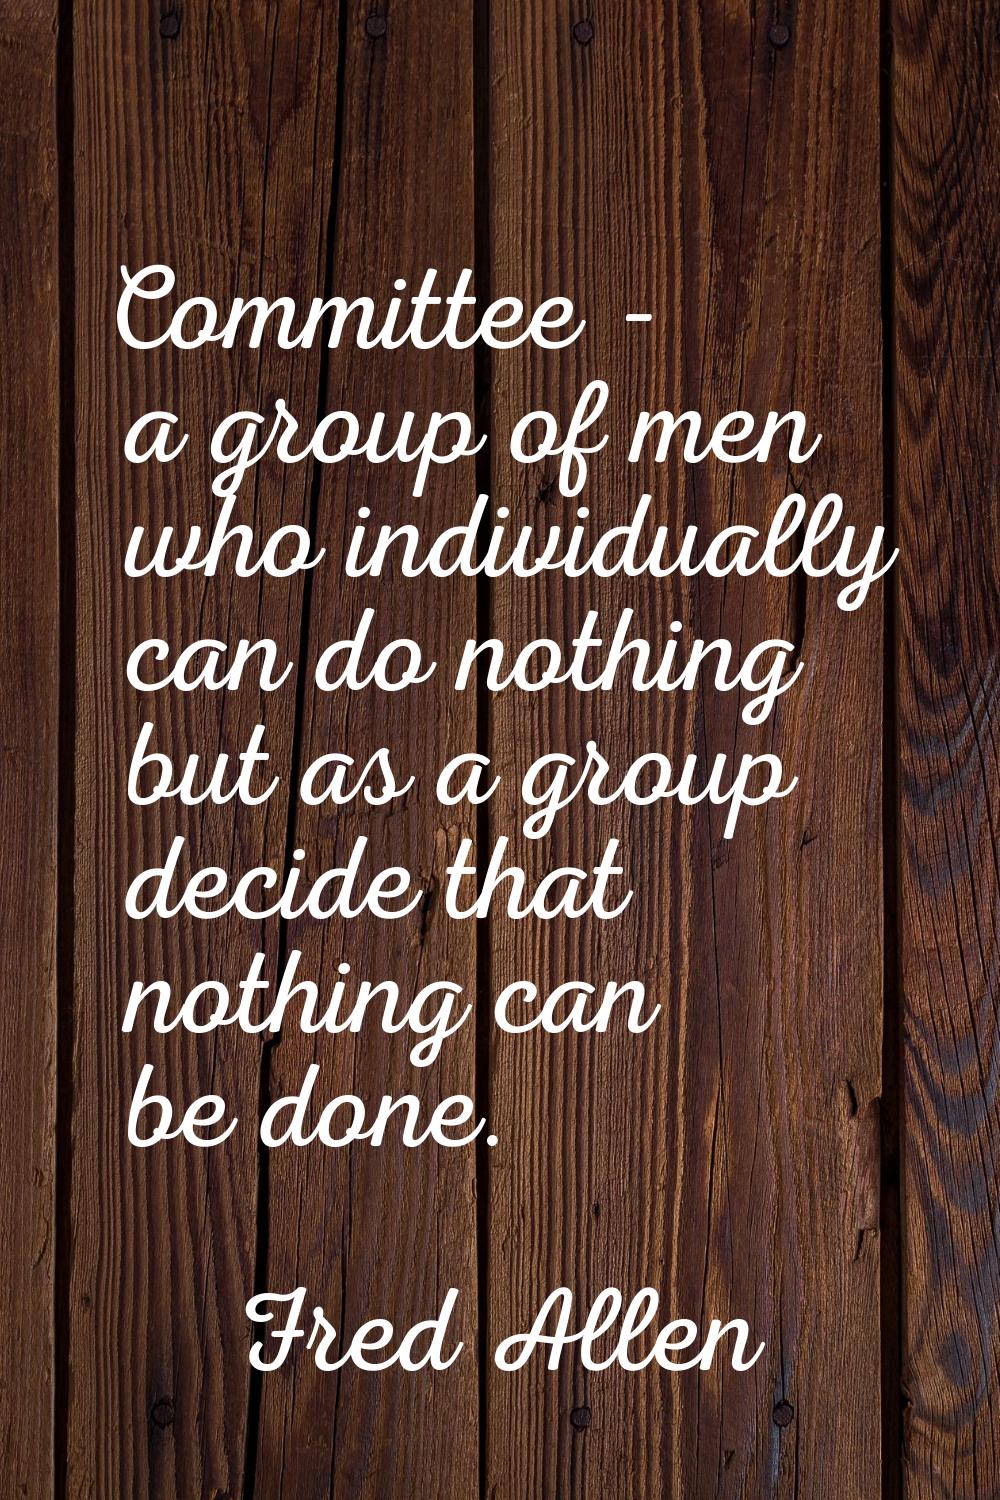 Committee - a group of men who individually can do nothing but as a group decide that nothing can b